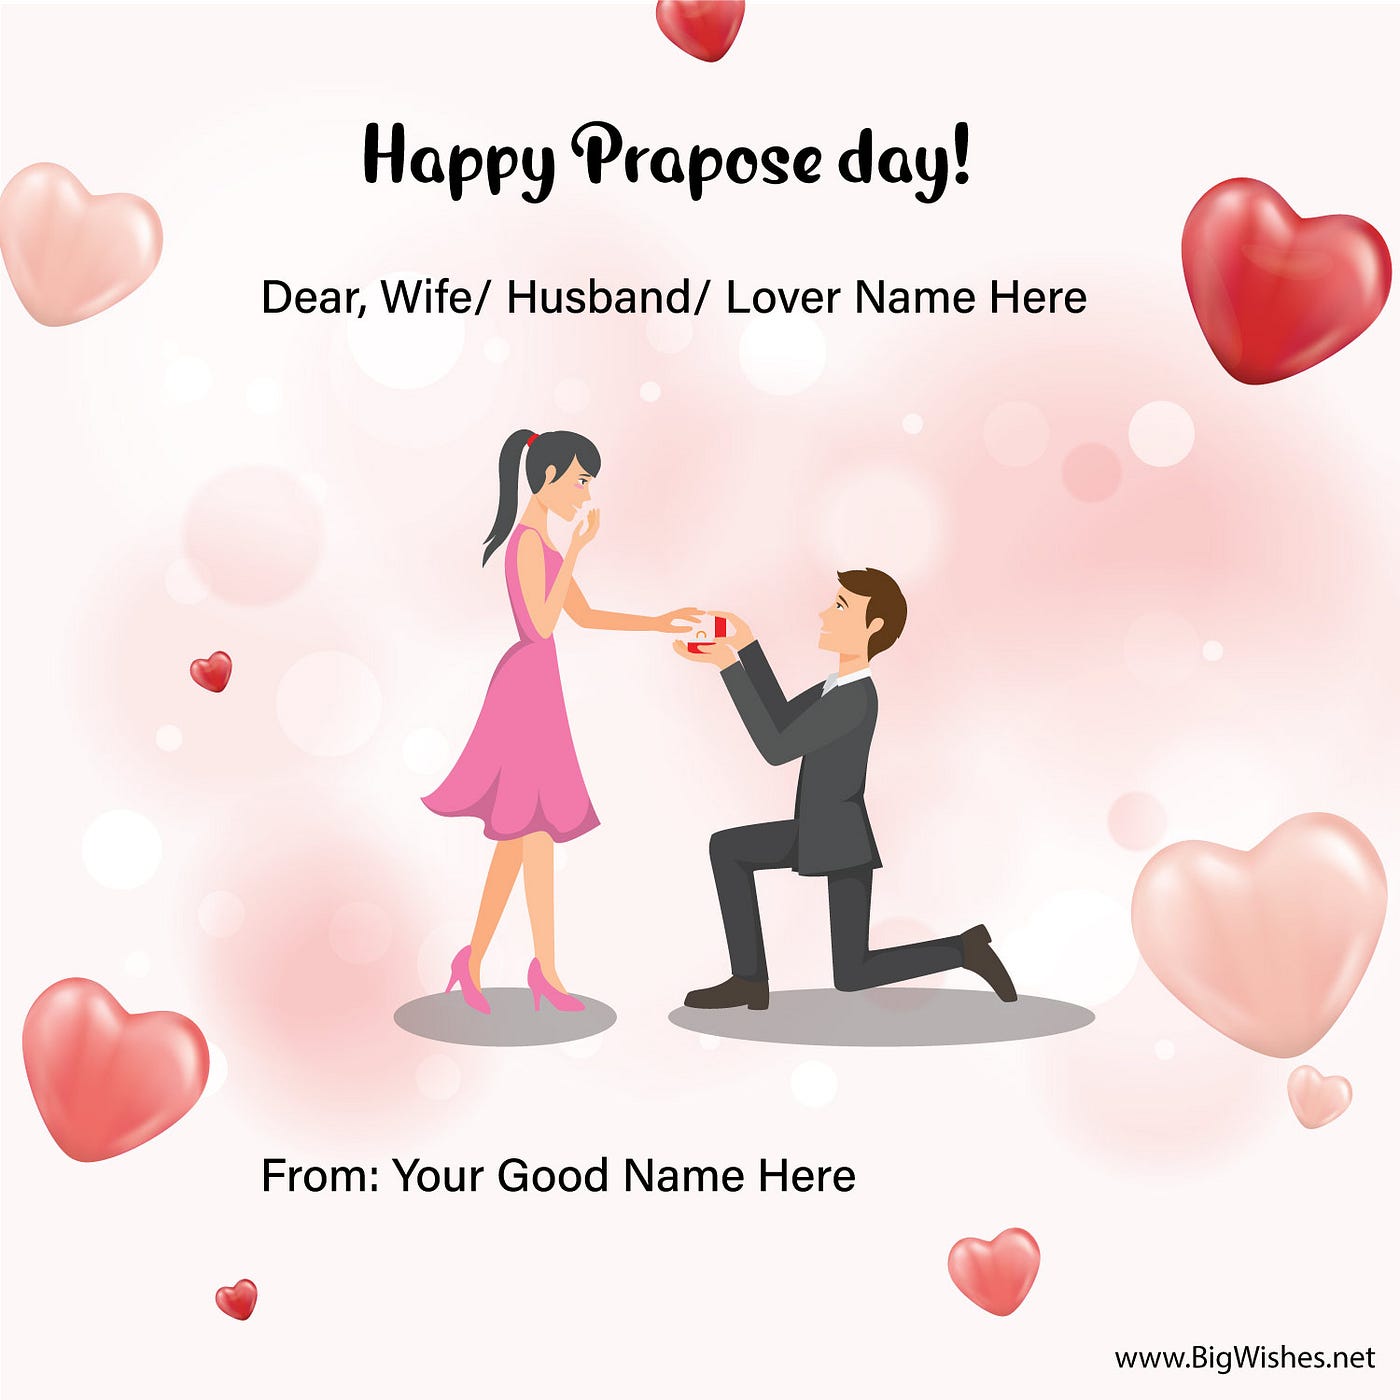 Propose Day Wishes Images & Cards (8th February) - Big Wishes - Medium